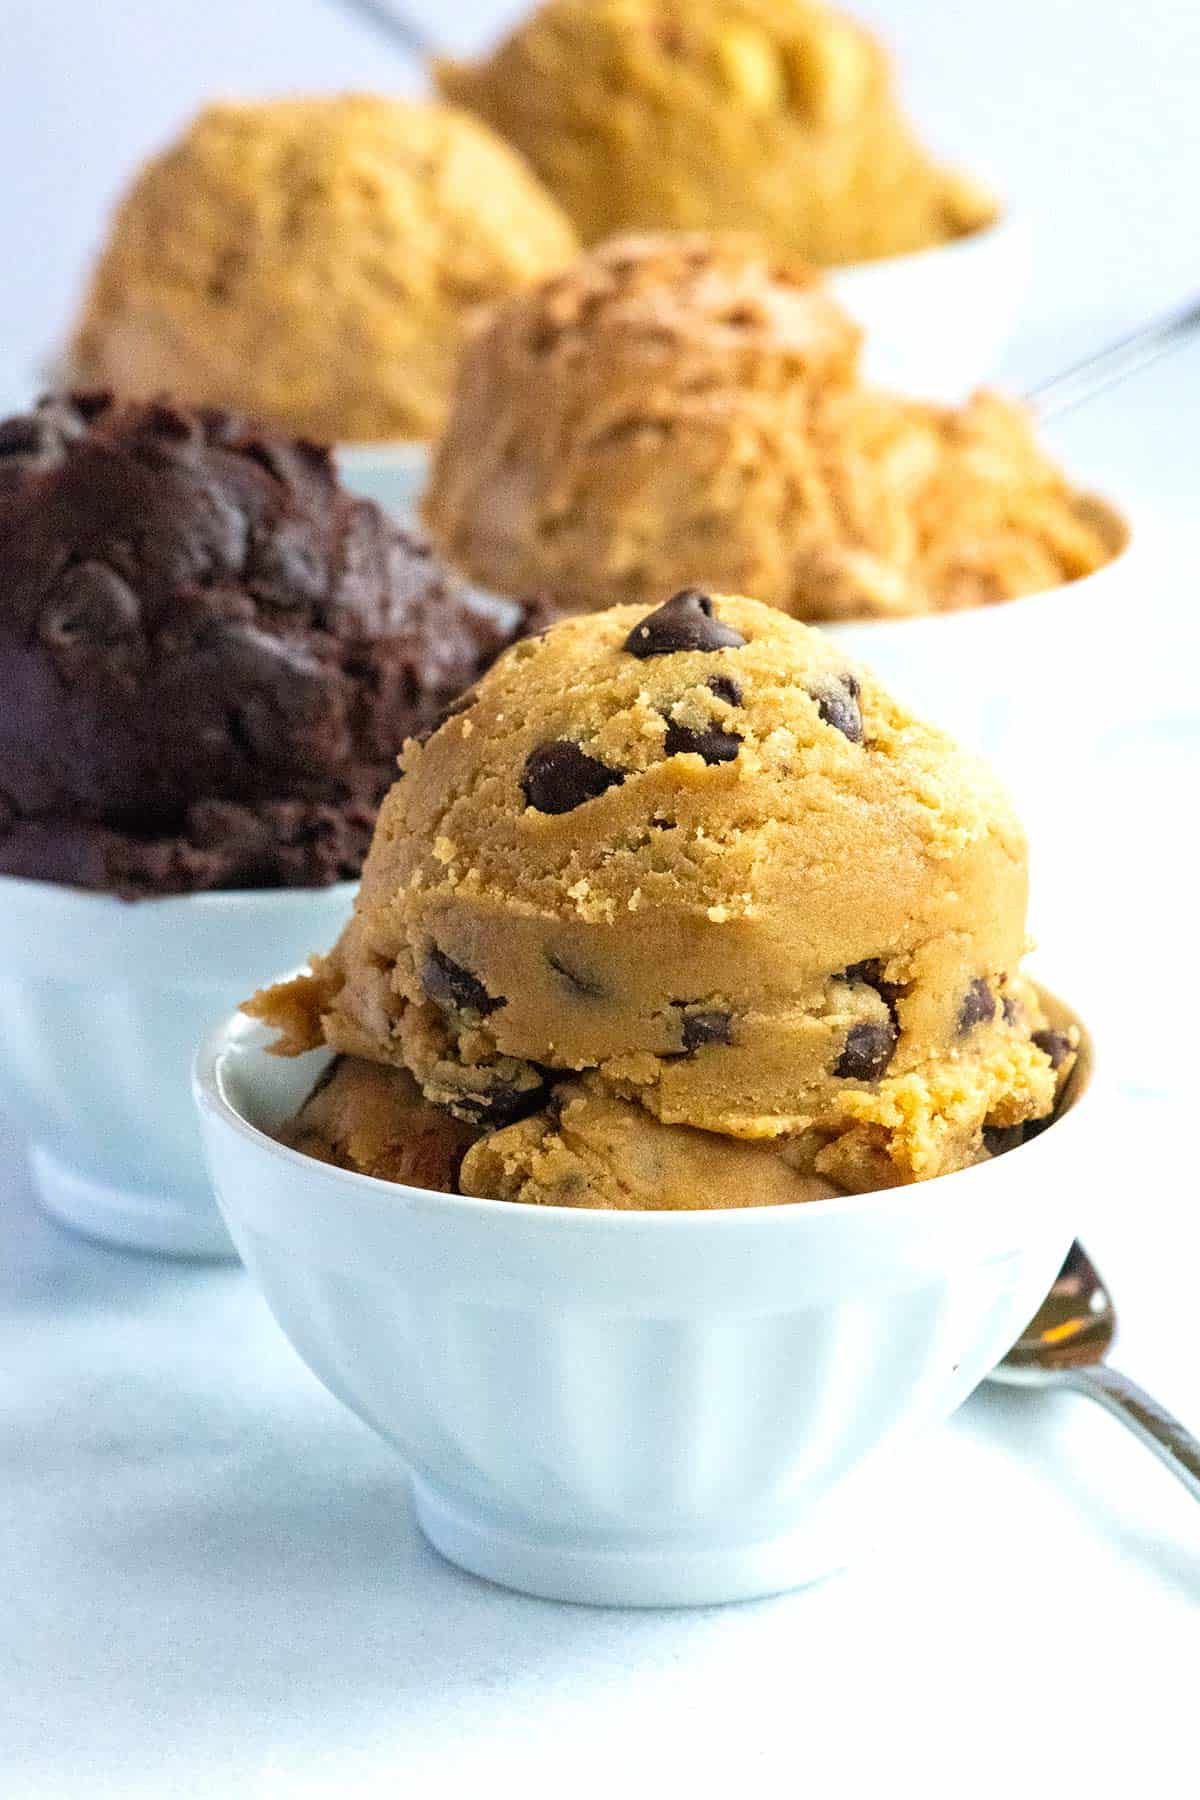 How to Make the Best Edible Cookie Dough